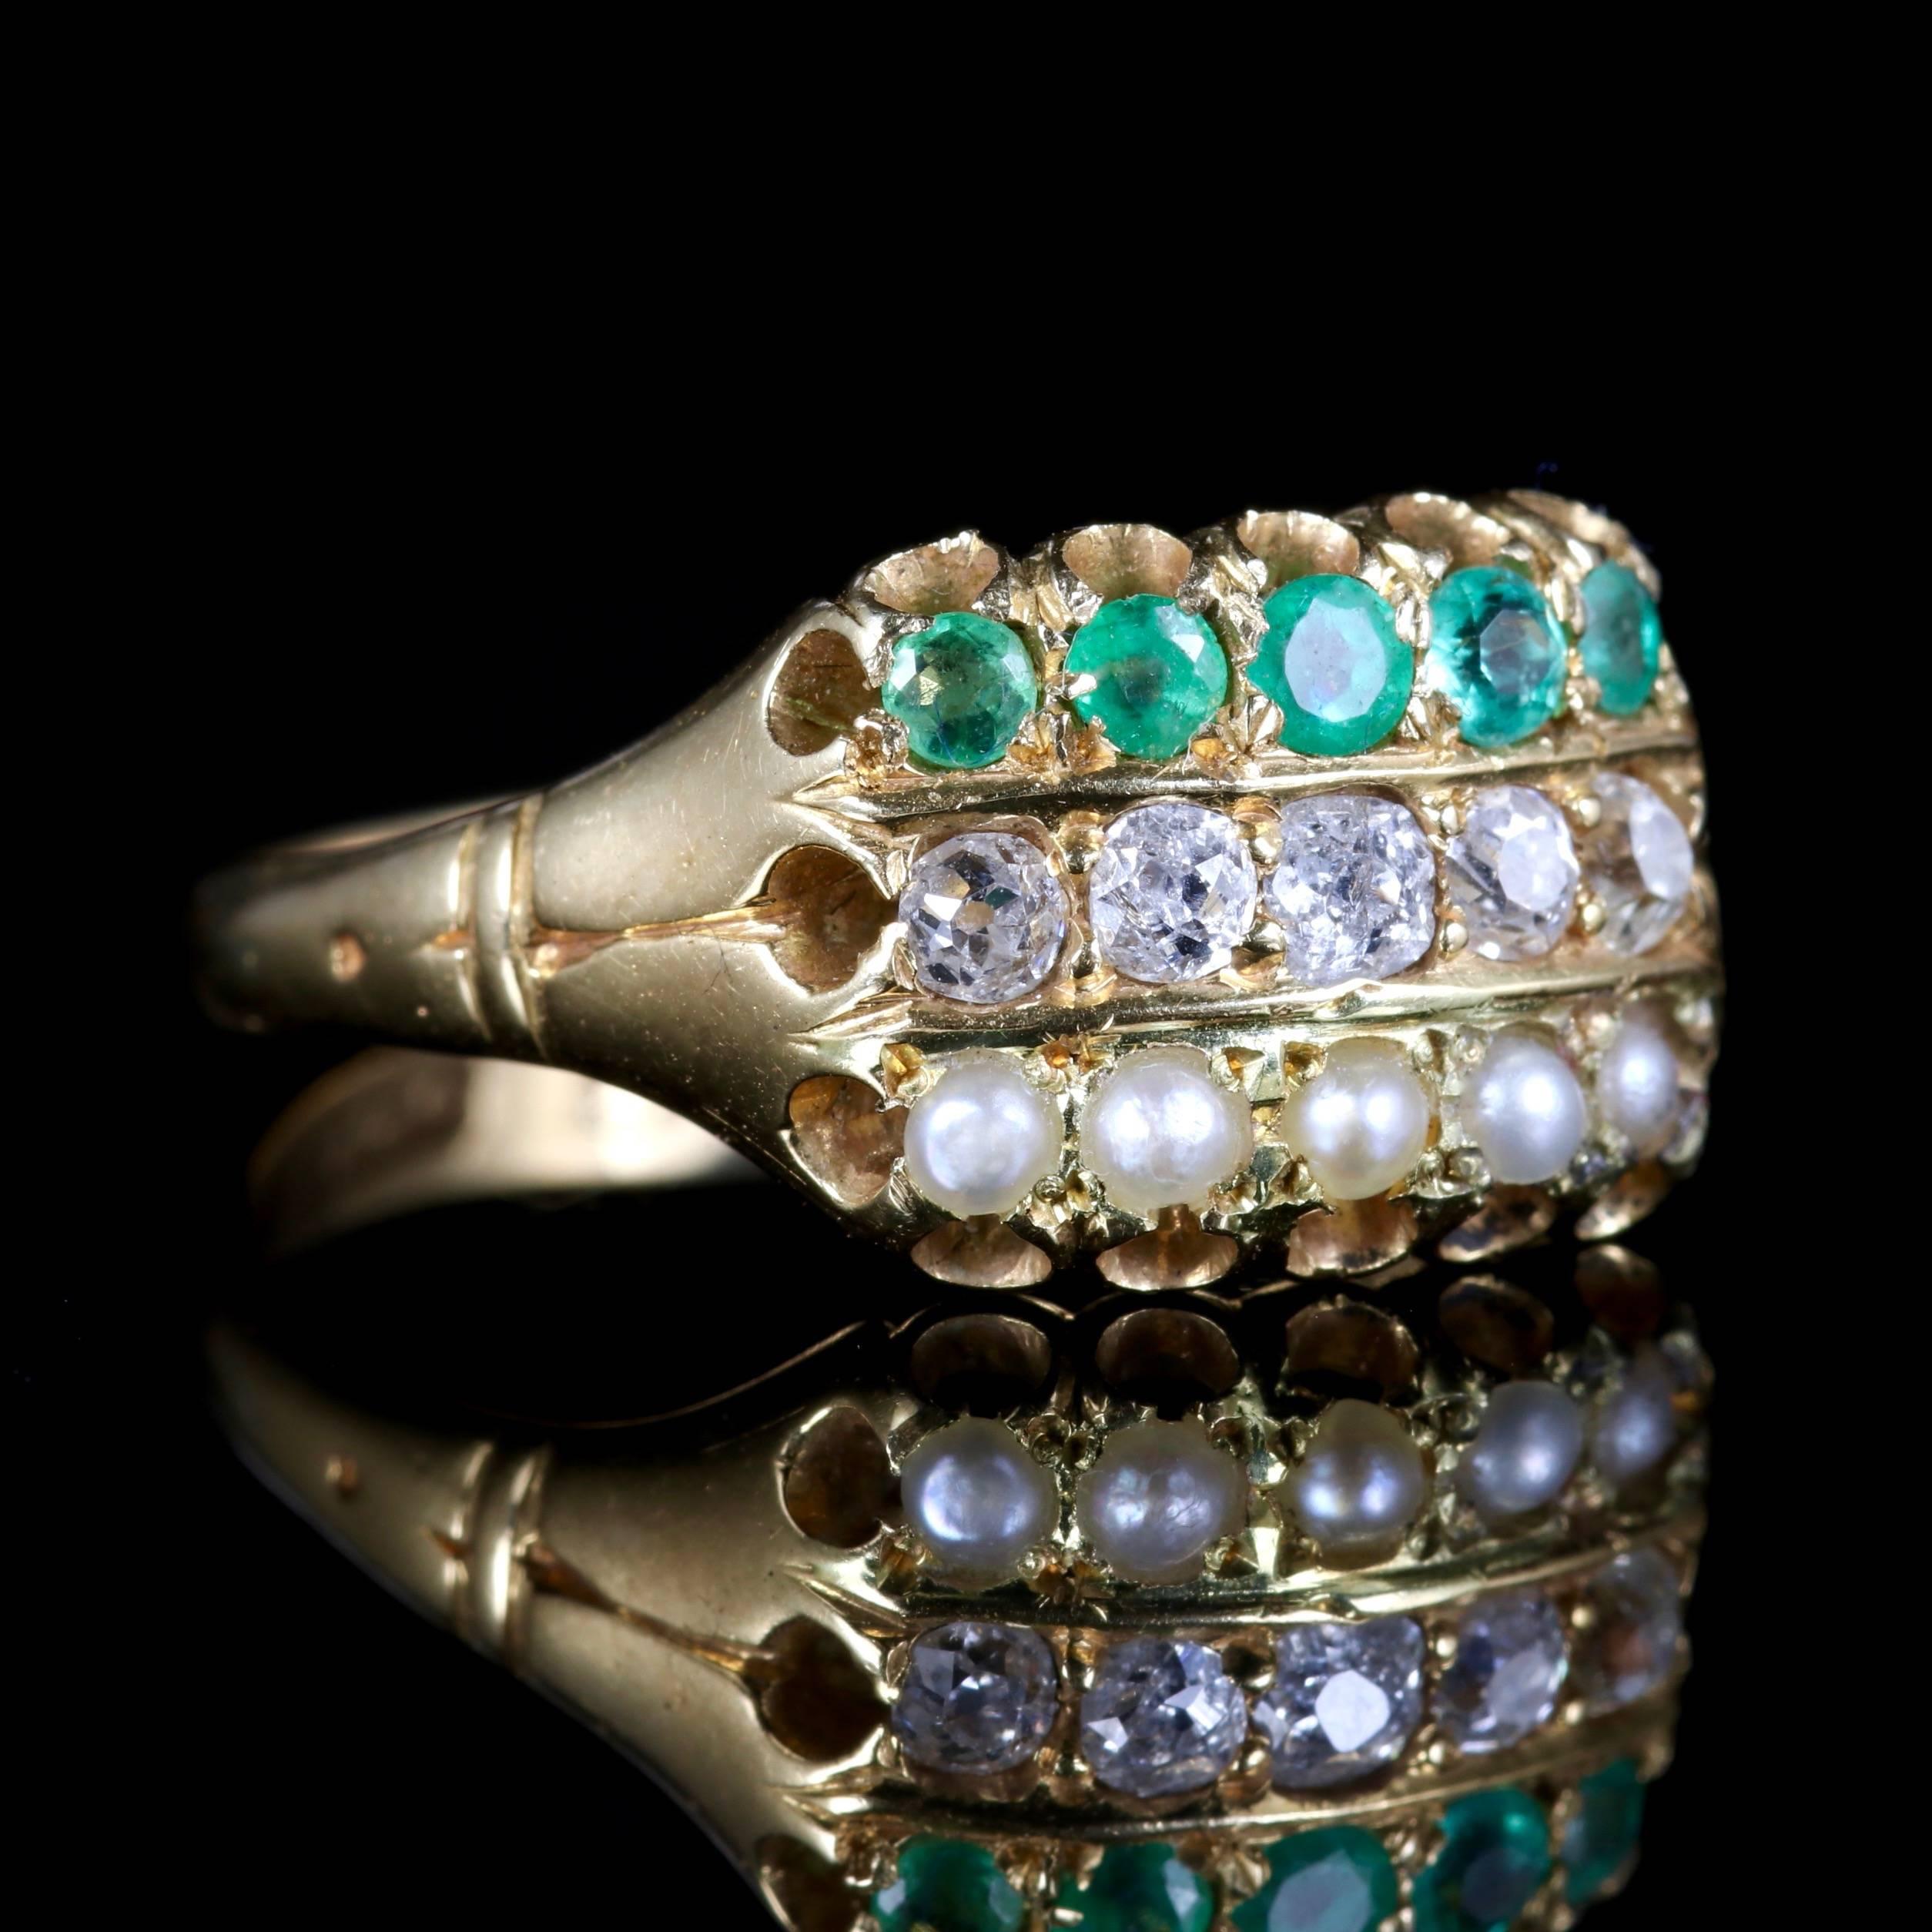 Women's Antique Victorian Emerald Diamond Pearl Ring 18 Carat Gold Dated 1882